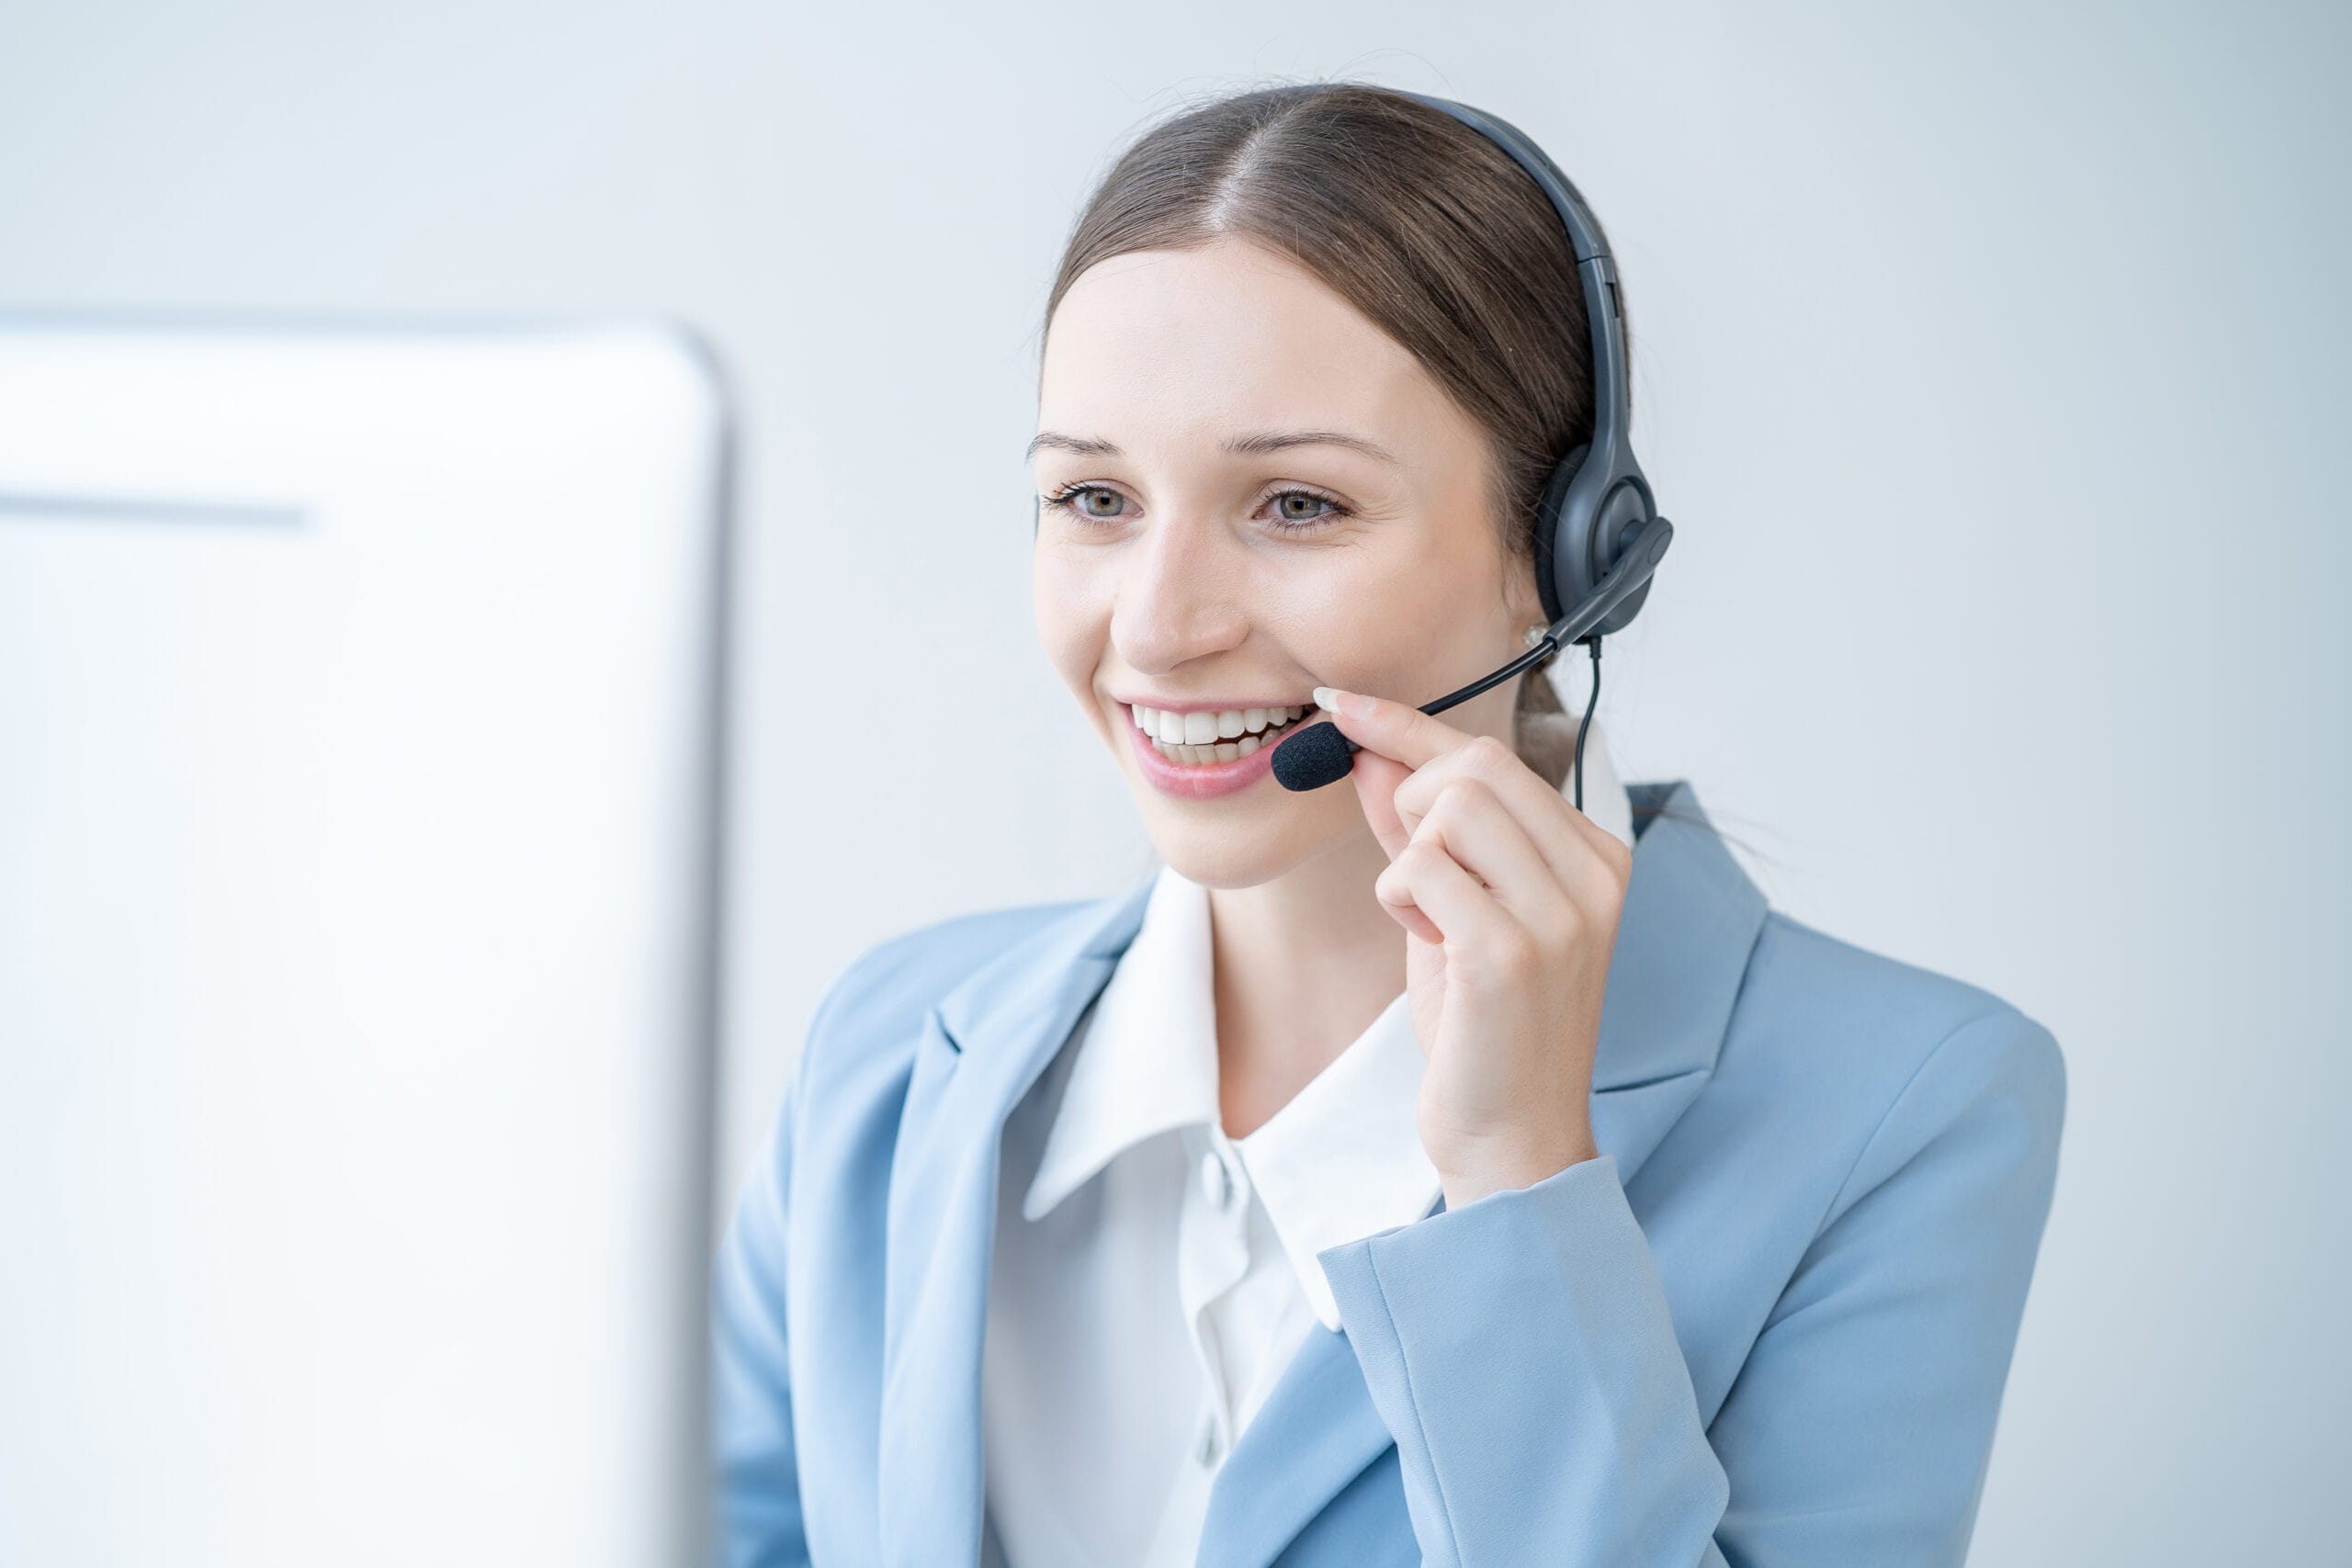 Live Receptionist: Adding A Personal Touch To Your Business Calls – Camden thumbnail